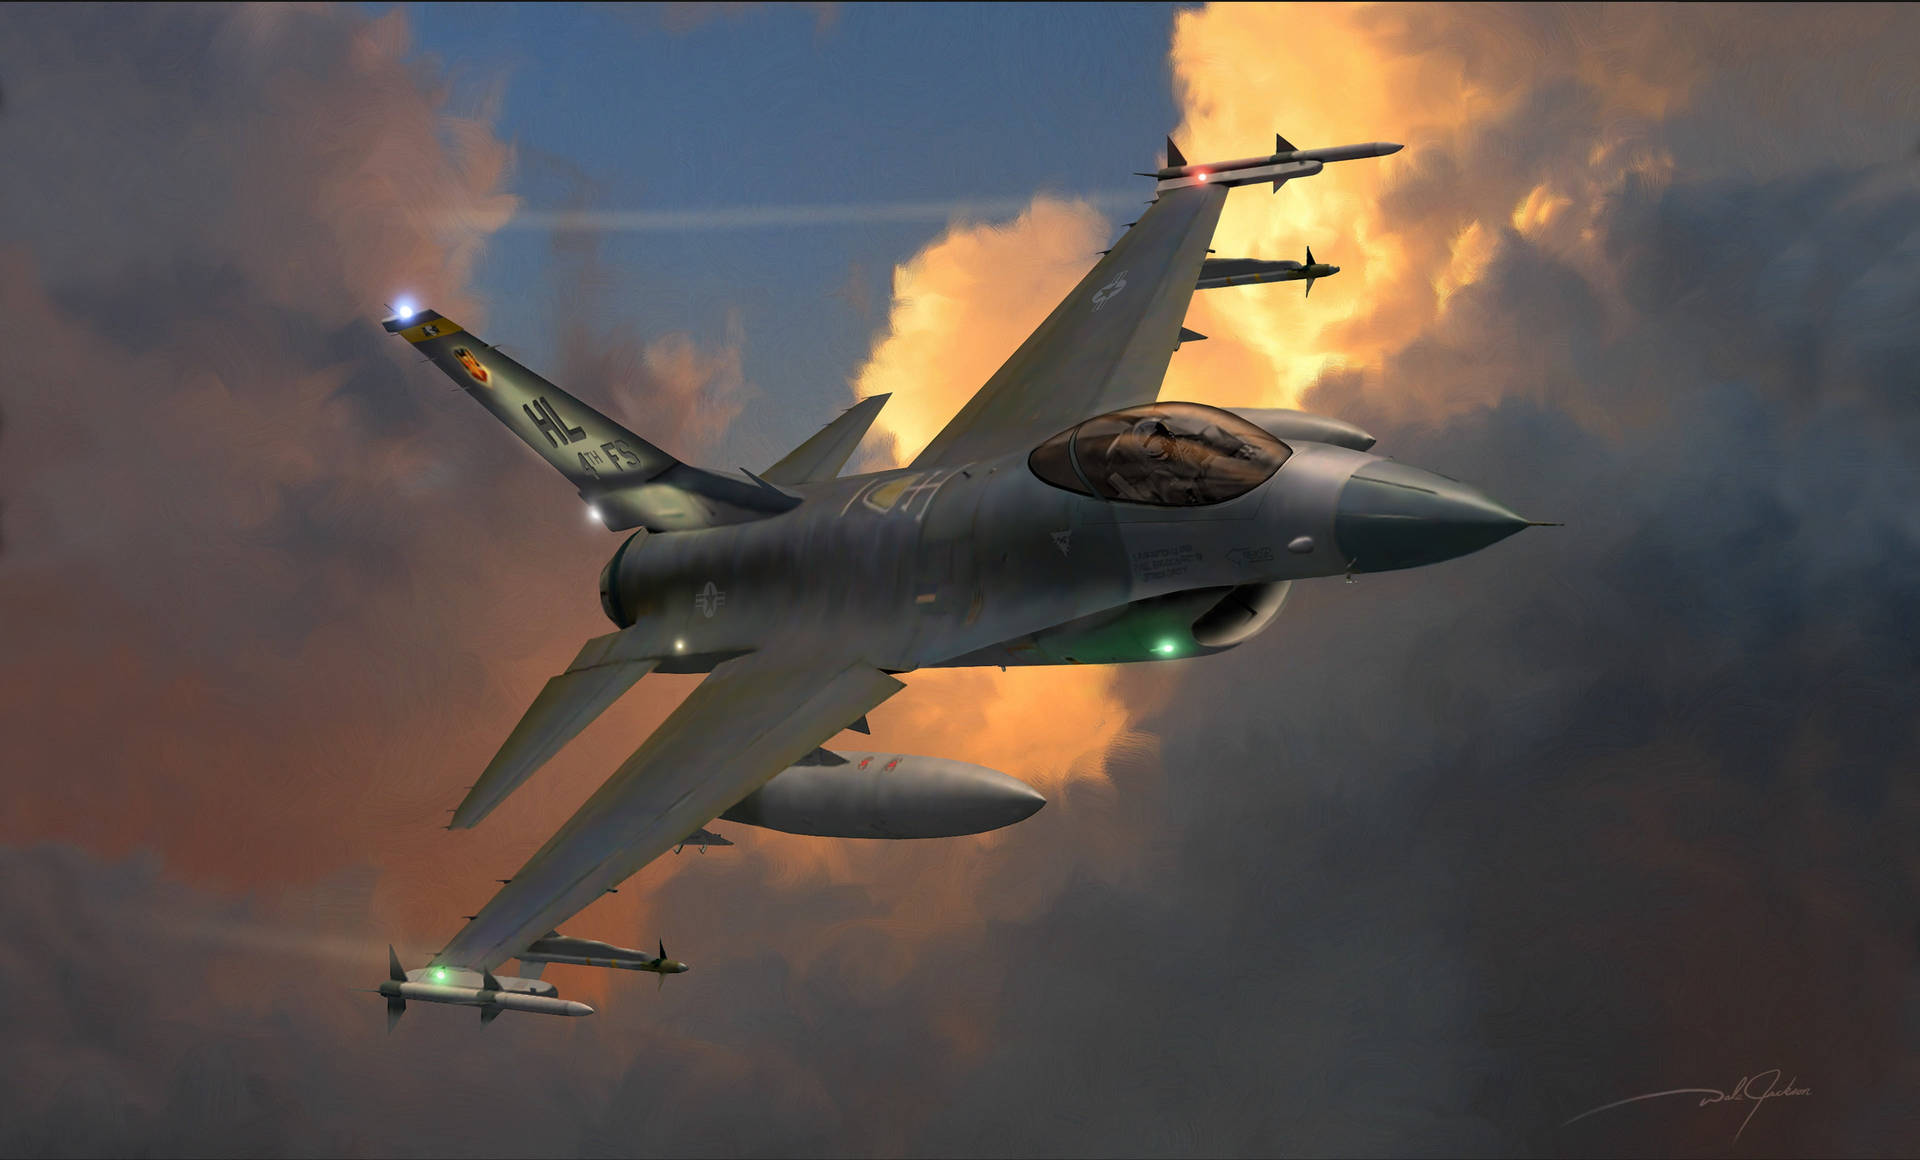 The F-16 Jet Fighter Clouds Background